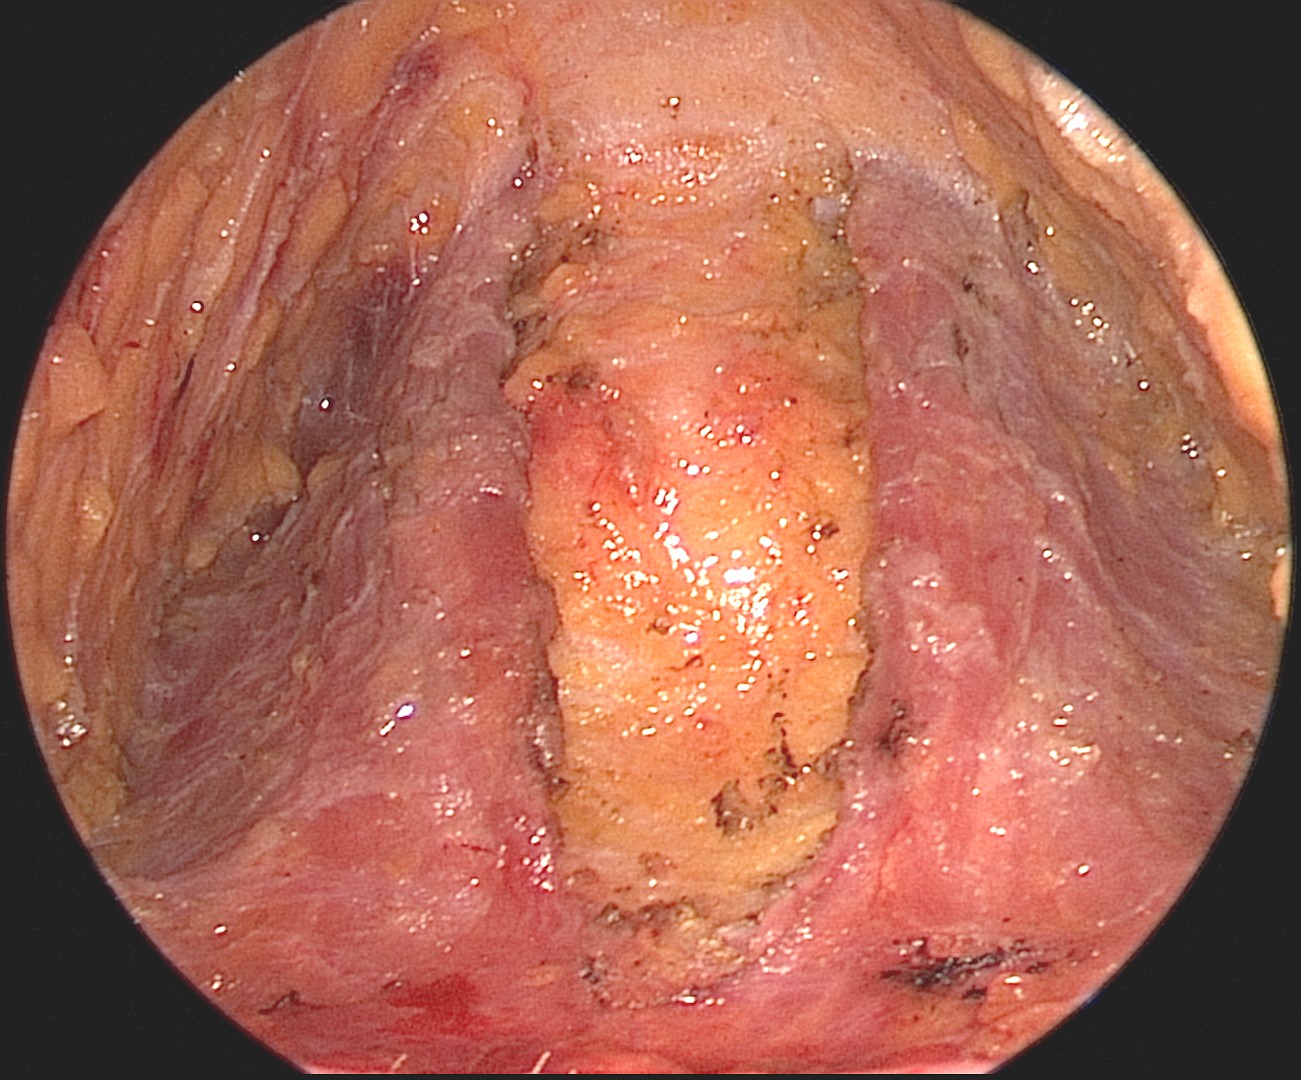 Endoscopic view of the platysma, demonstrating midline dehiscence of the muscles